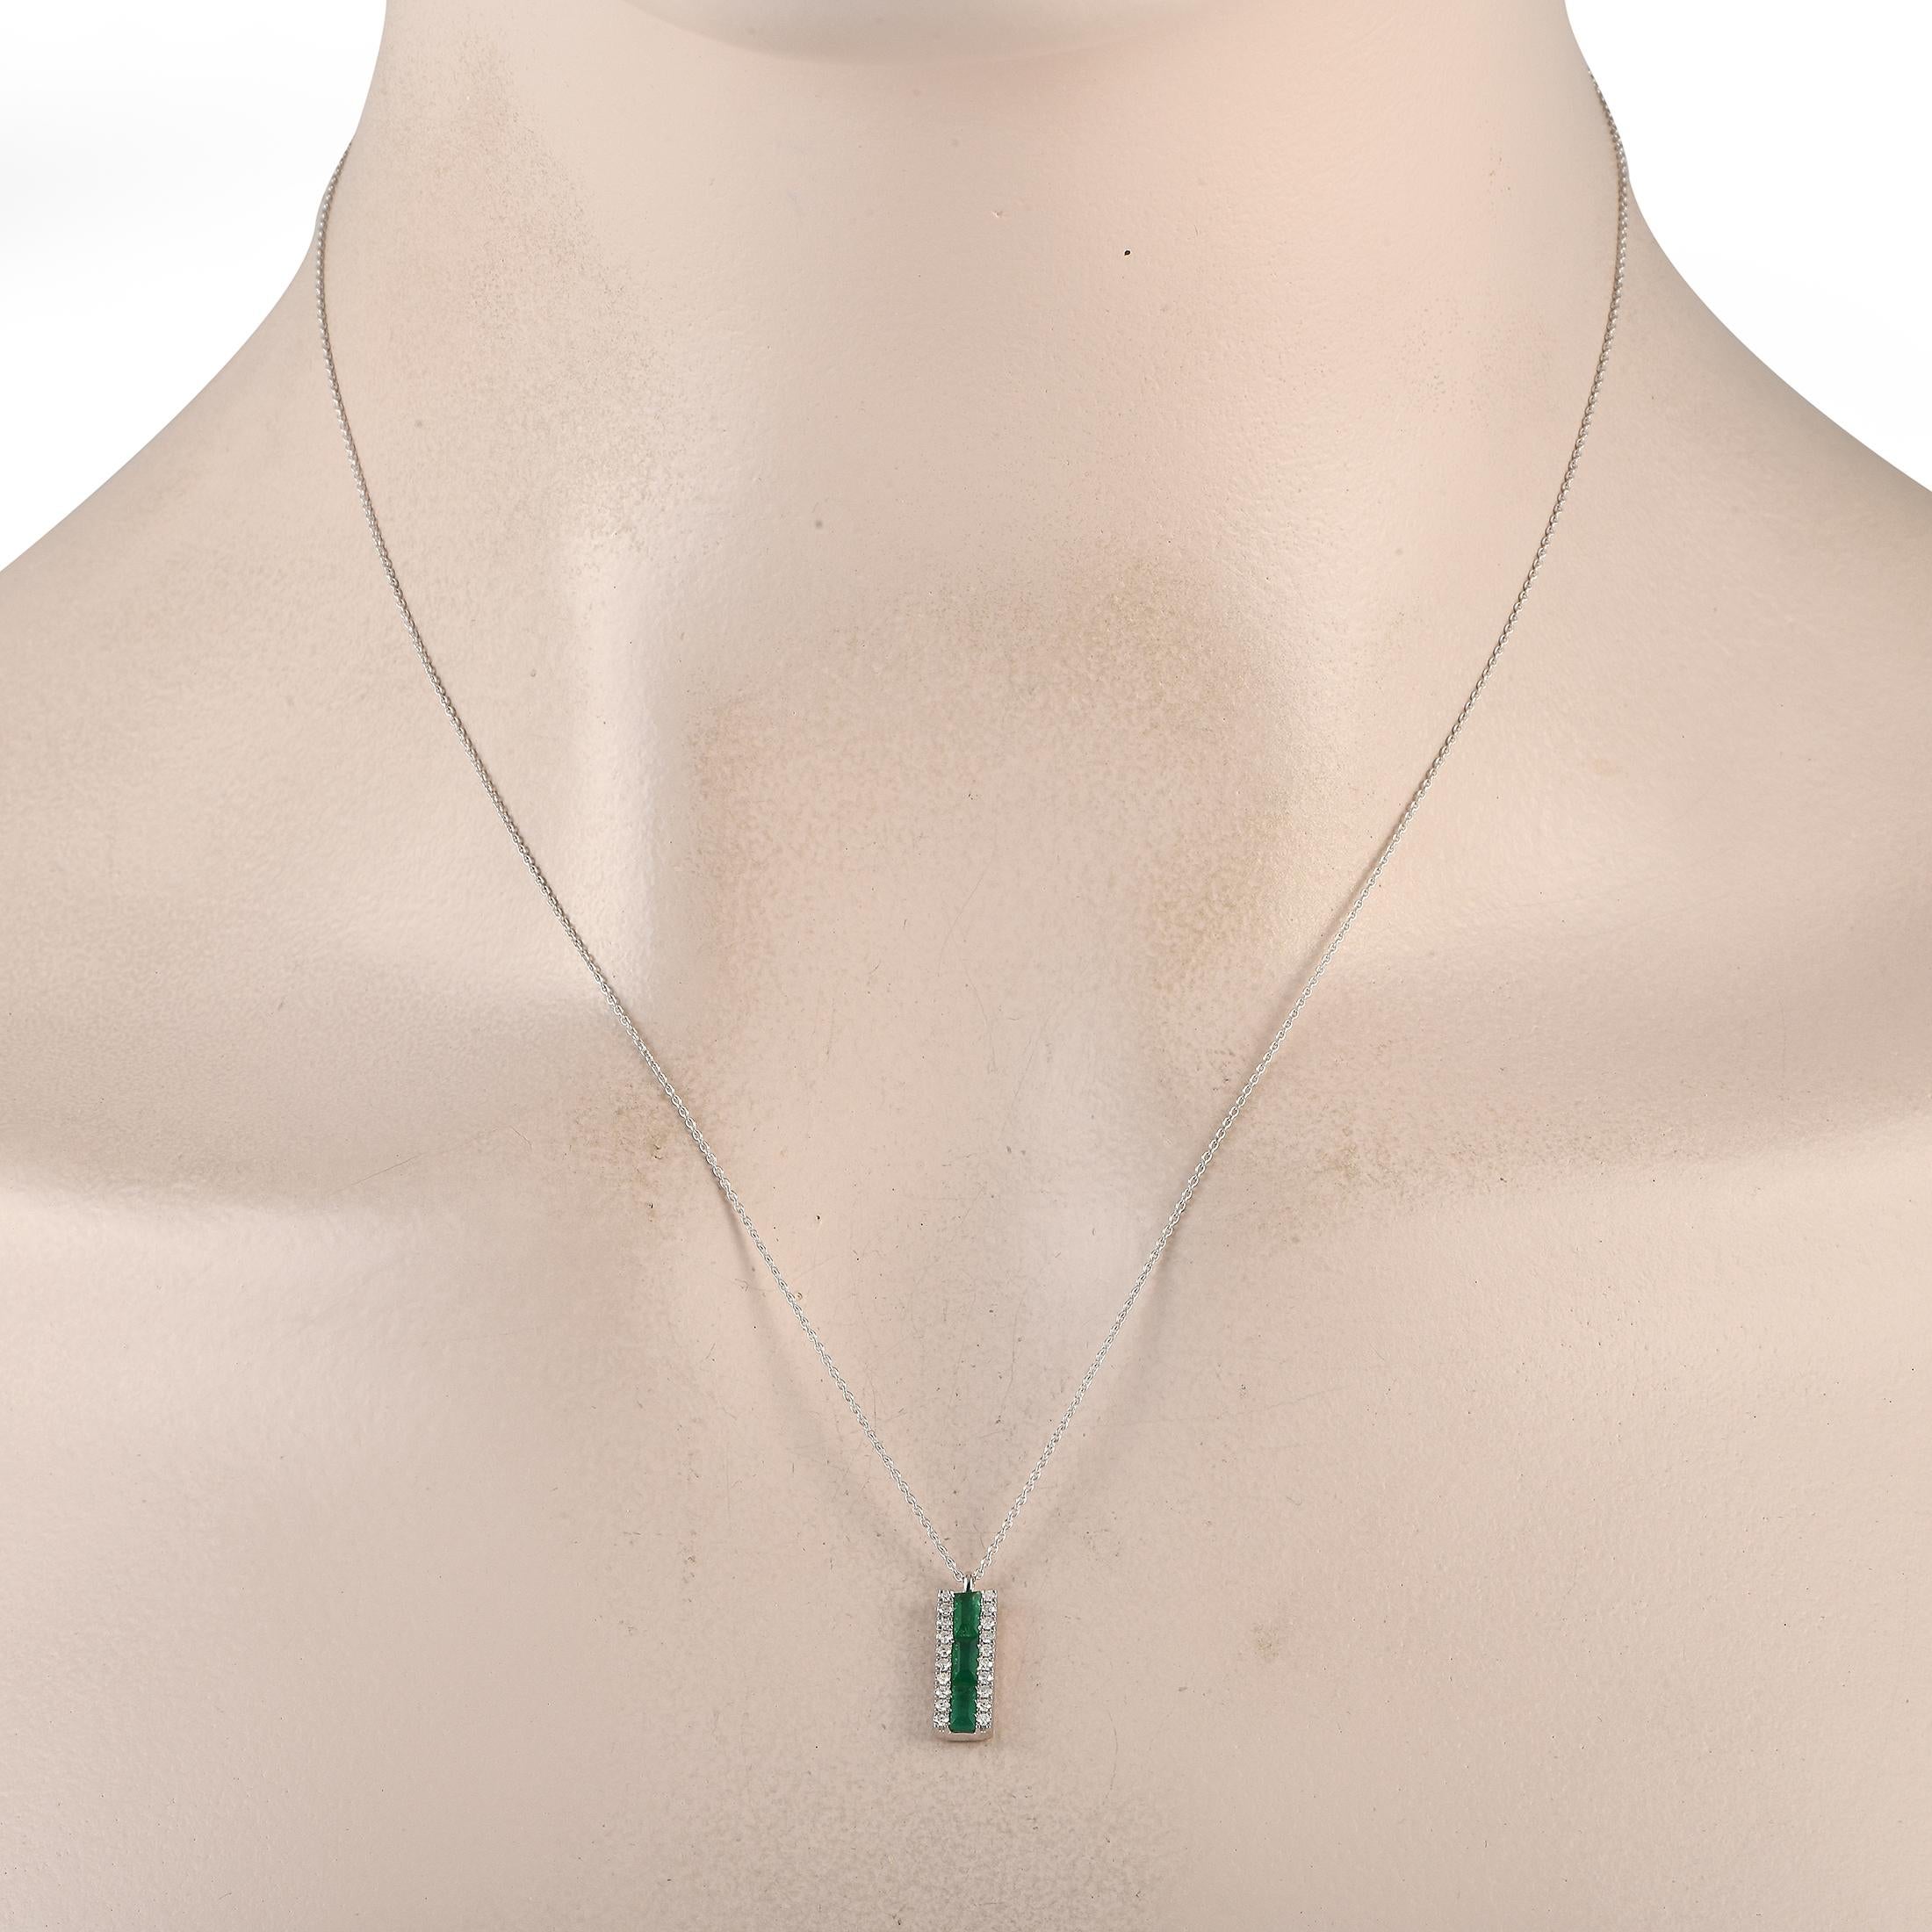 A series of captivating emerald gemstones make this necklace simply unforgettable. Stylish and sophisticated in design, this pieces pendant is crafted from 14K white gold and measures 0.65 long by 0.25 wide. Round-cut diamonds totaling 0.10 carats